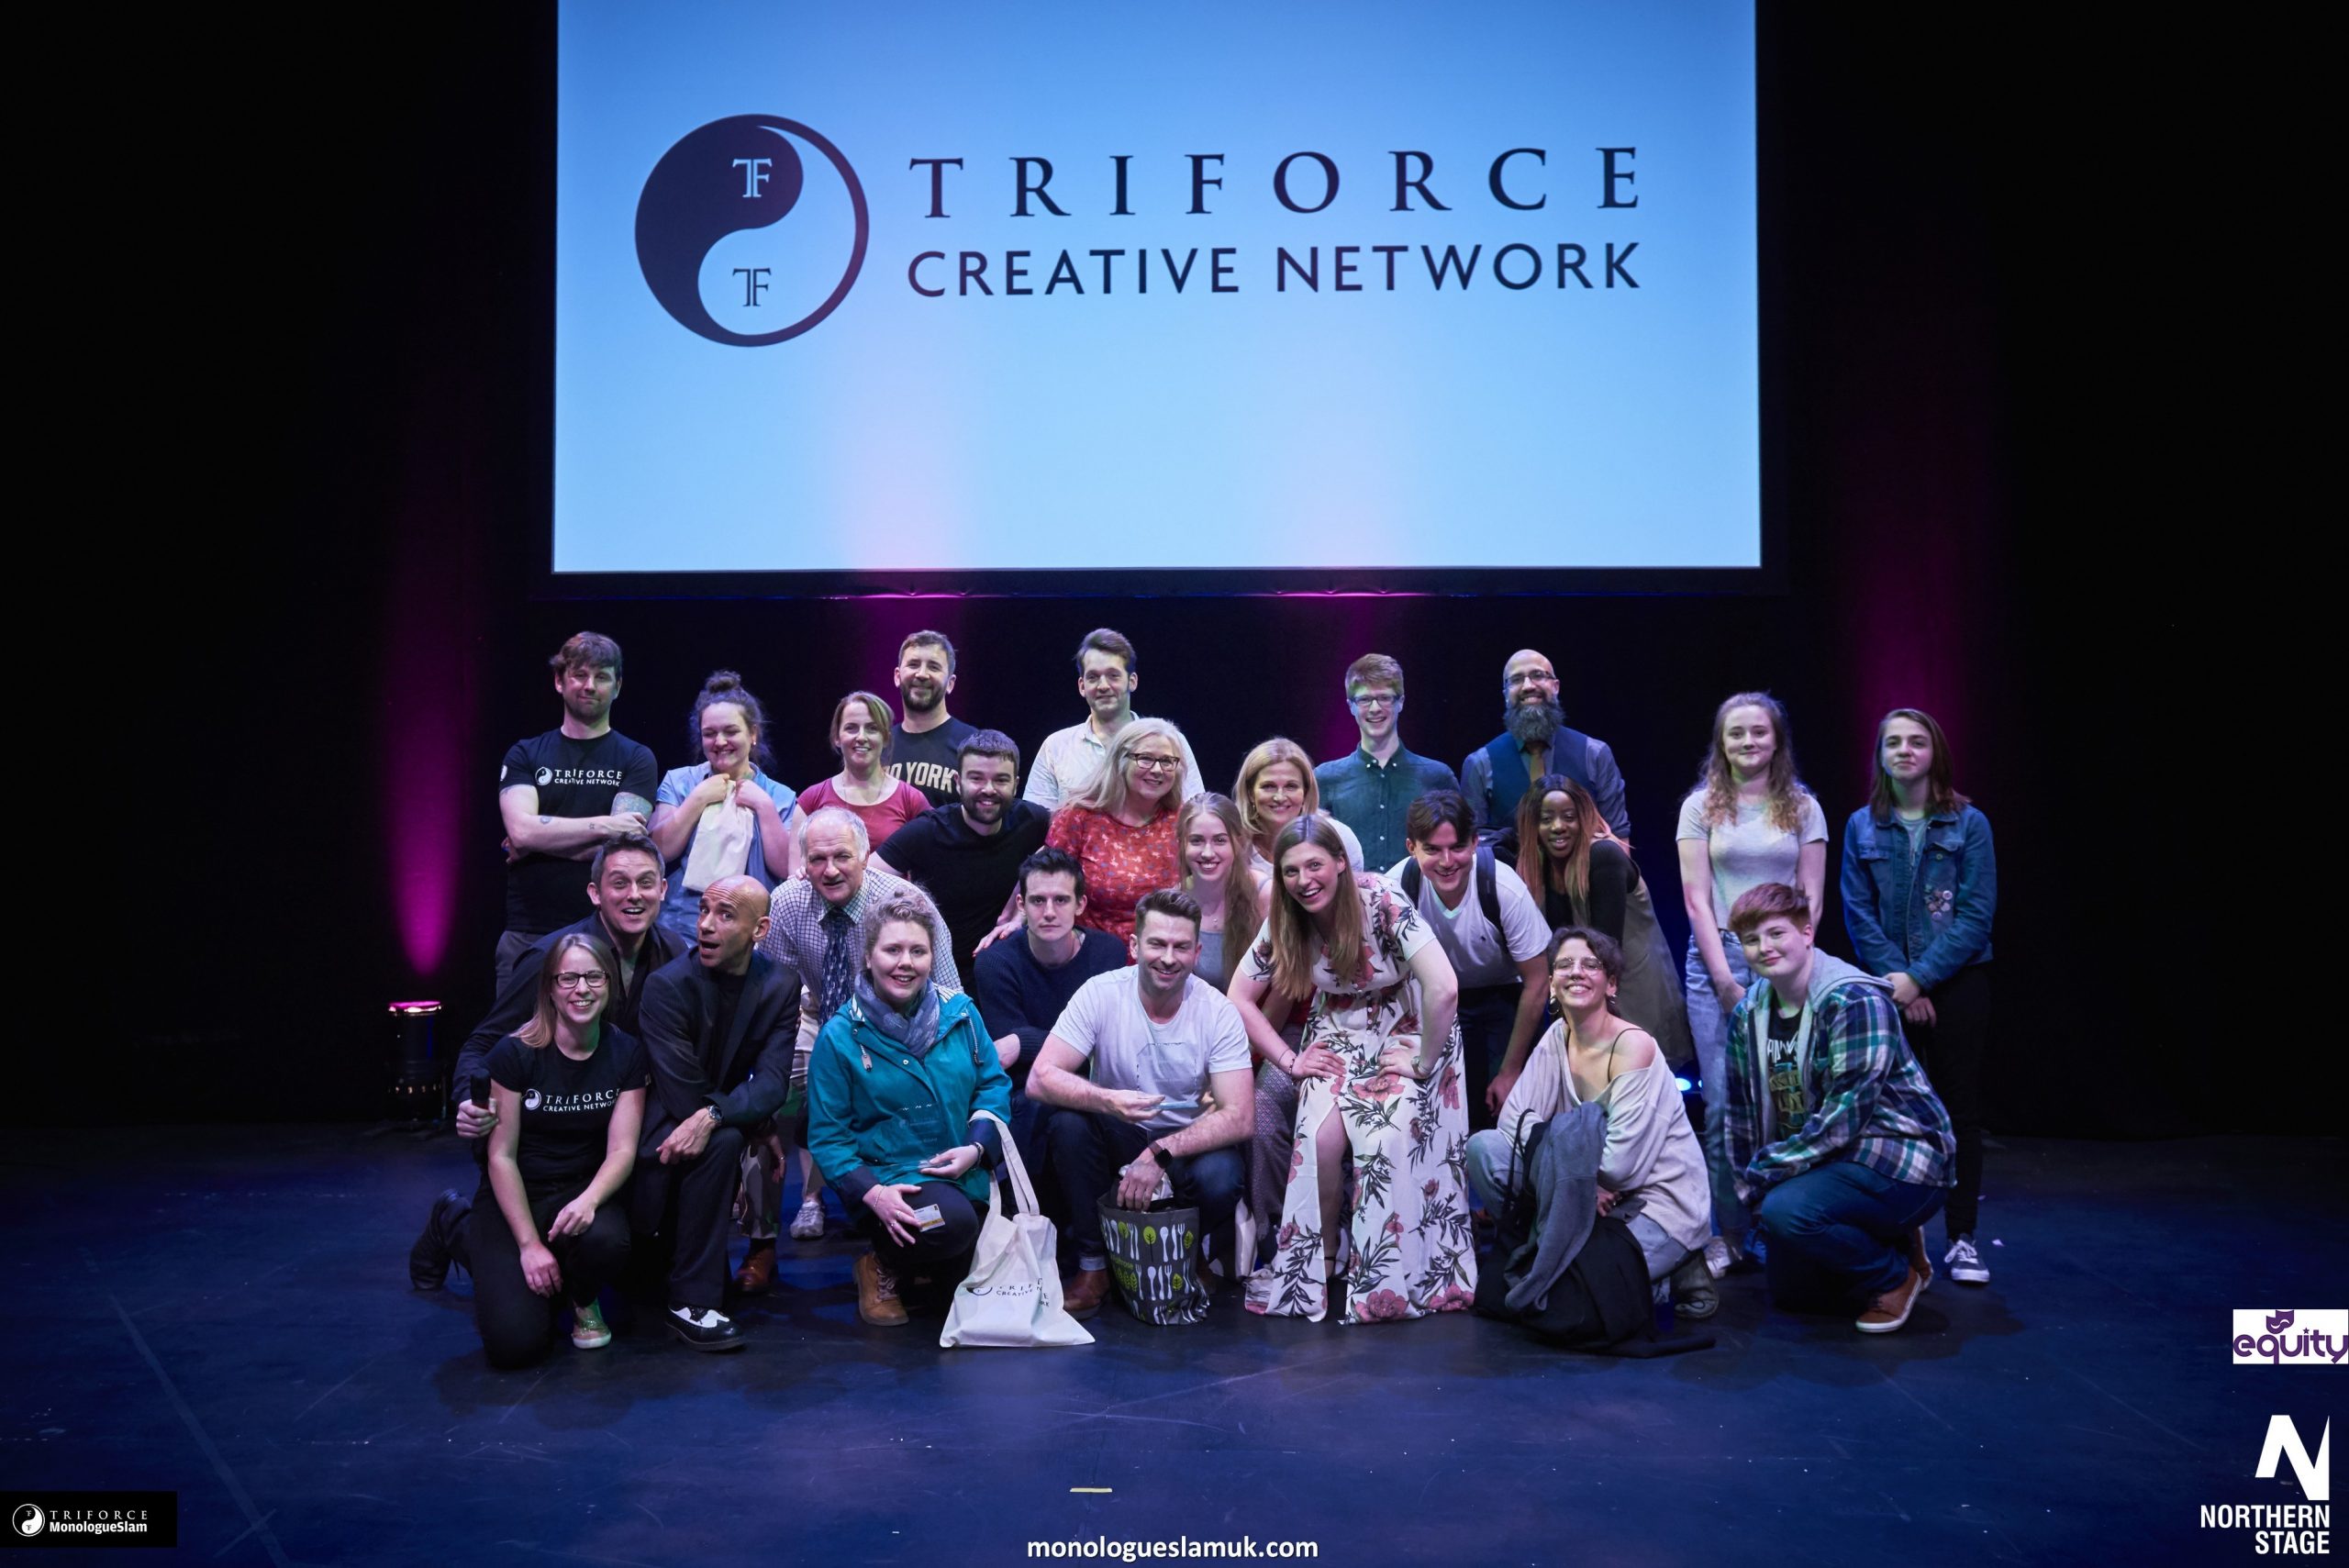 Just reminding everyone what an amazing time we had @NorthernStage for the first time earlier this year! Very pleased to say we’ll be back in spring 2020 for another MonologueSlam as part of NORTH Festival! Keep an eye out on monologueslamuk.com or sign up to our mailing list to make sure you don’t miss out! #Newcastle #NorthernStage #NorthernTalent